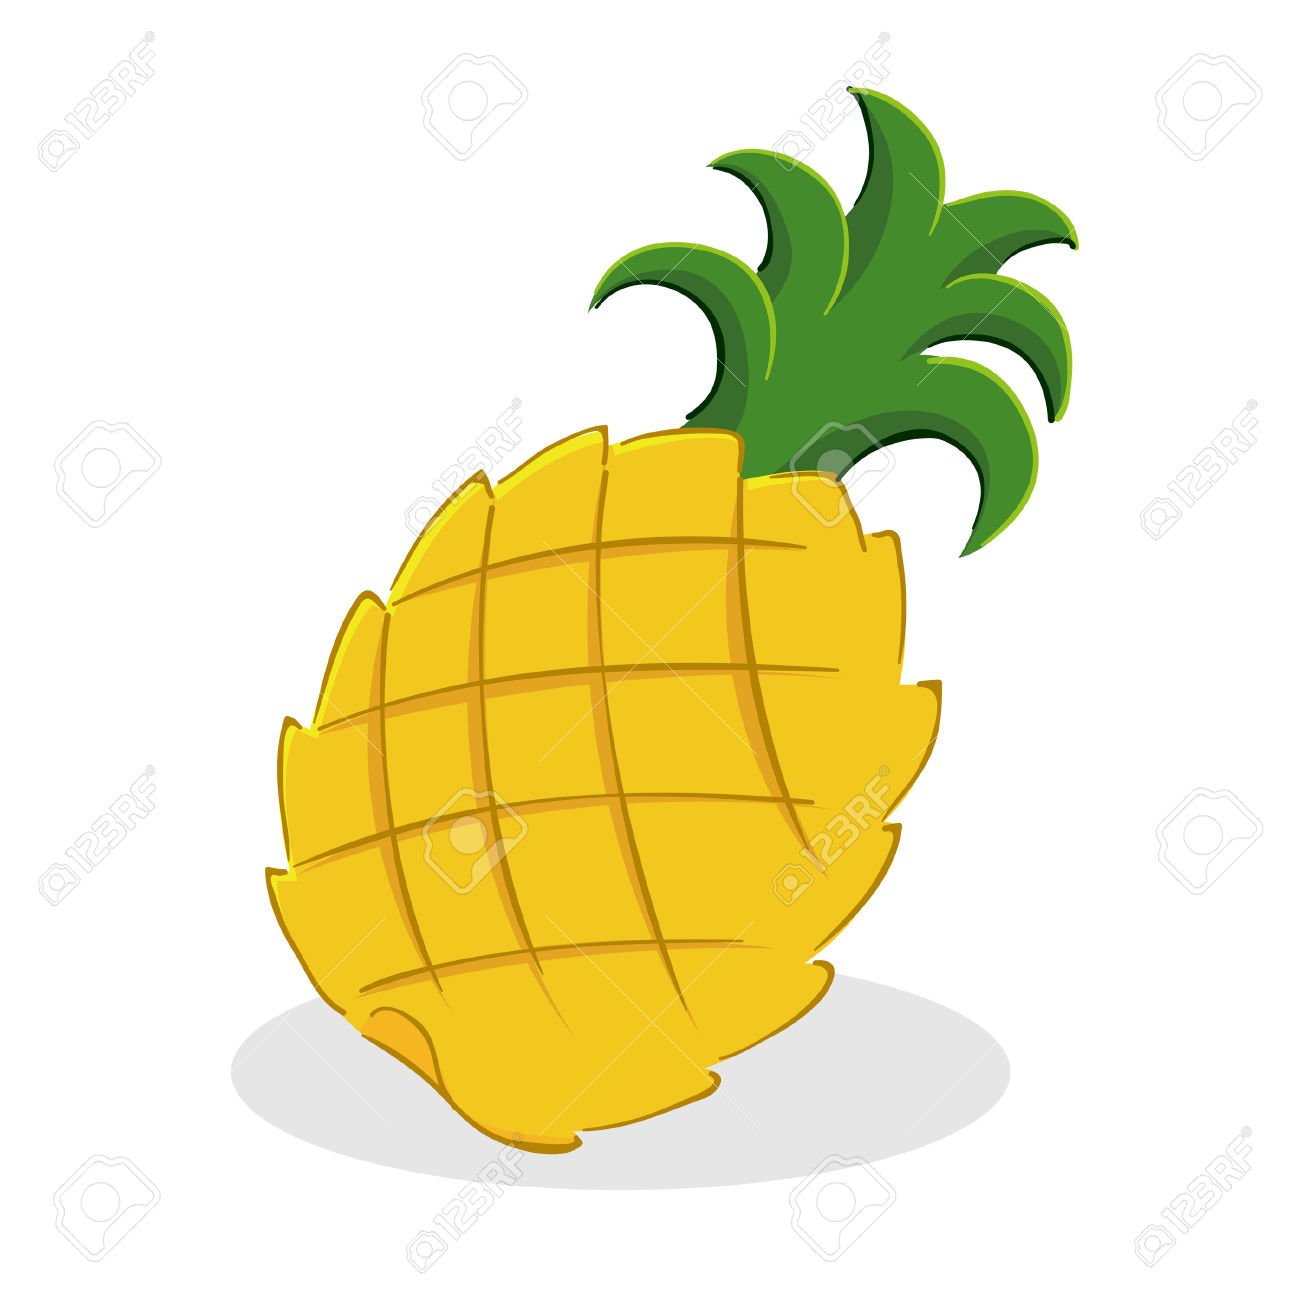 Pineapple Image | Free download on ClipArtMag